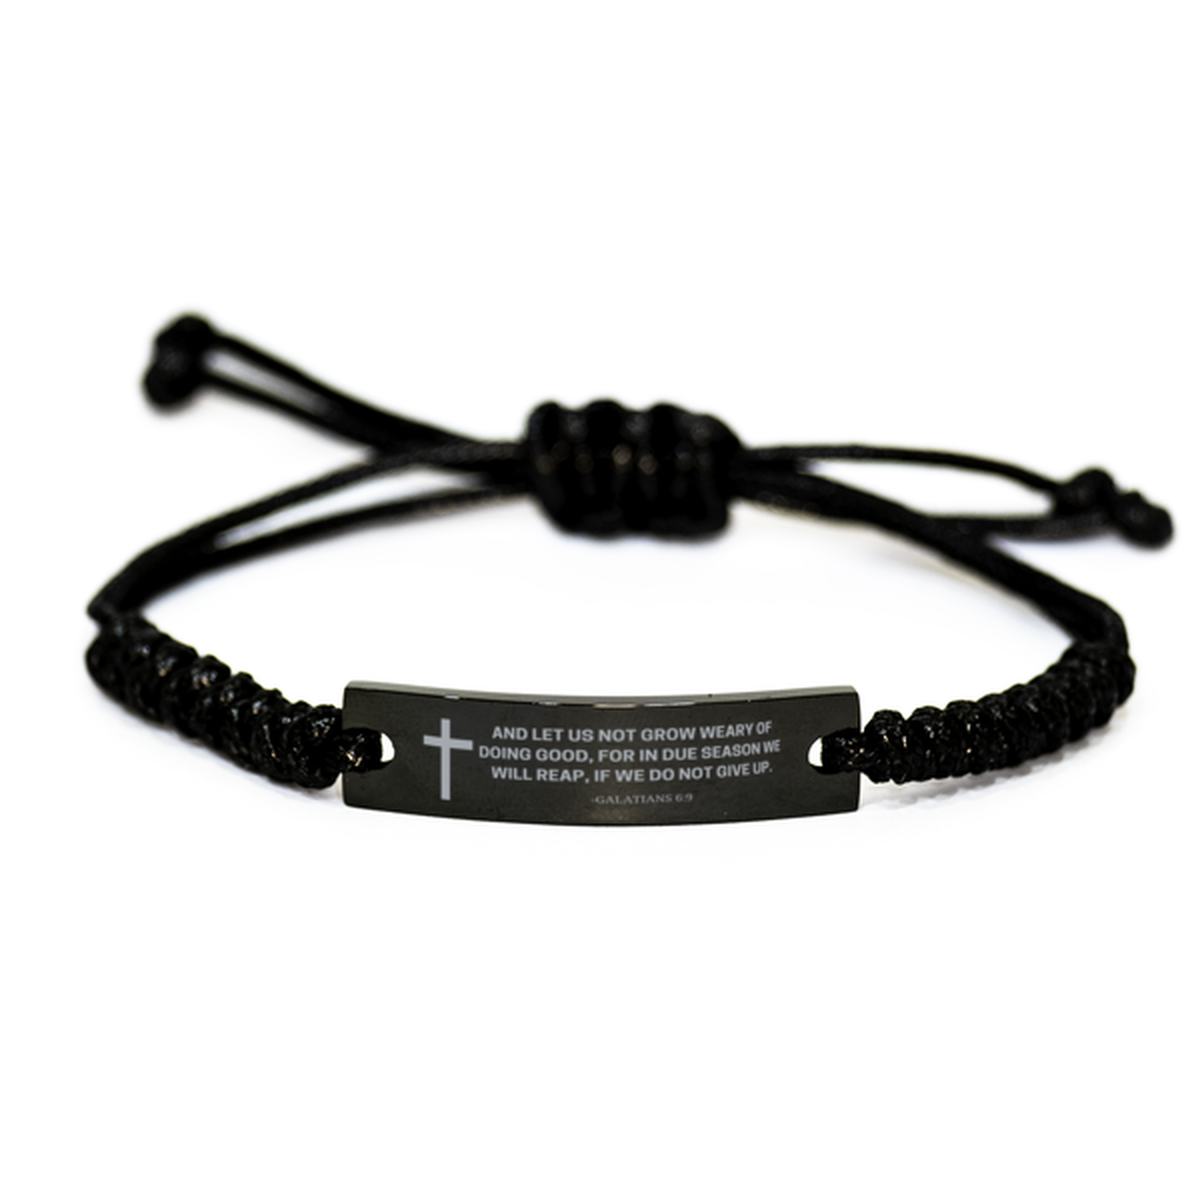 Baptism Gifts For Teenage Boys Girls, Christian Bible Verse Black Rope Bracelet, And let us not grow weary, Catholic Confirmation Gifts for Son, Godson, Grandson, Nephew